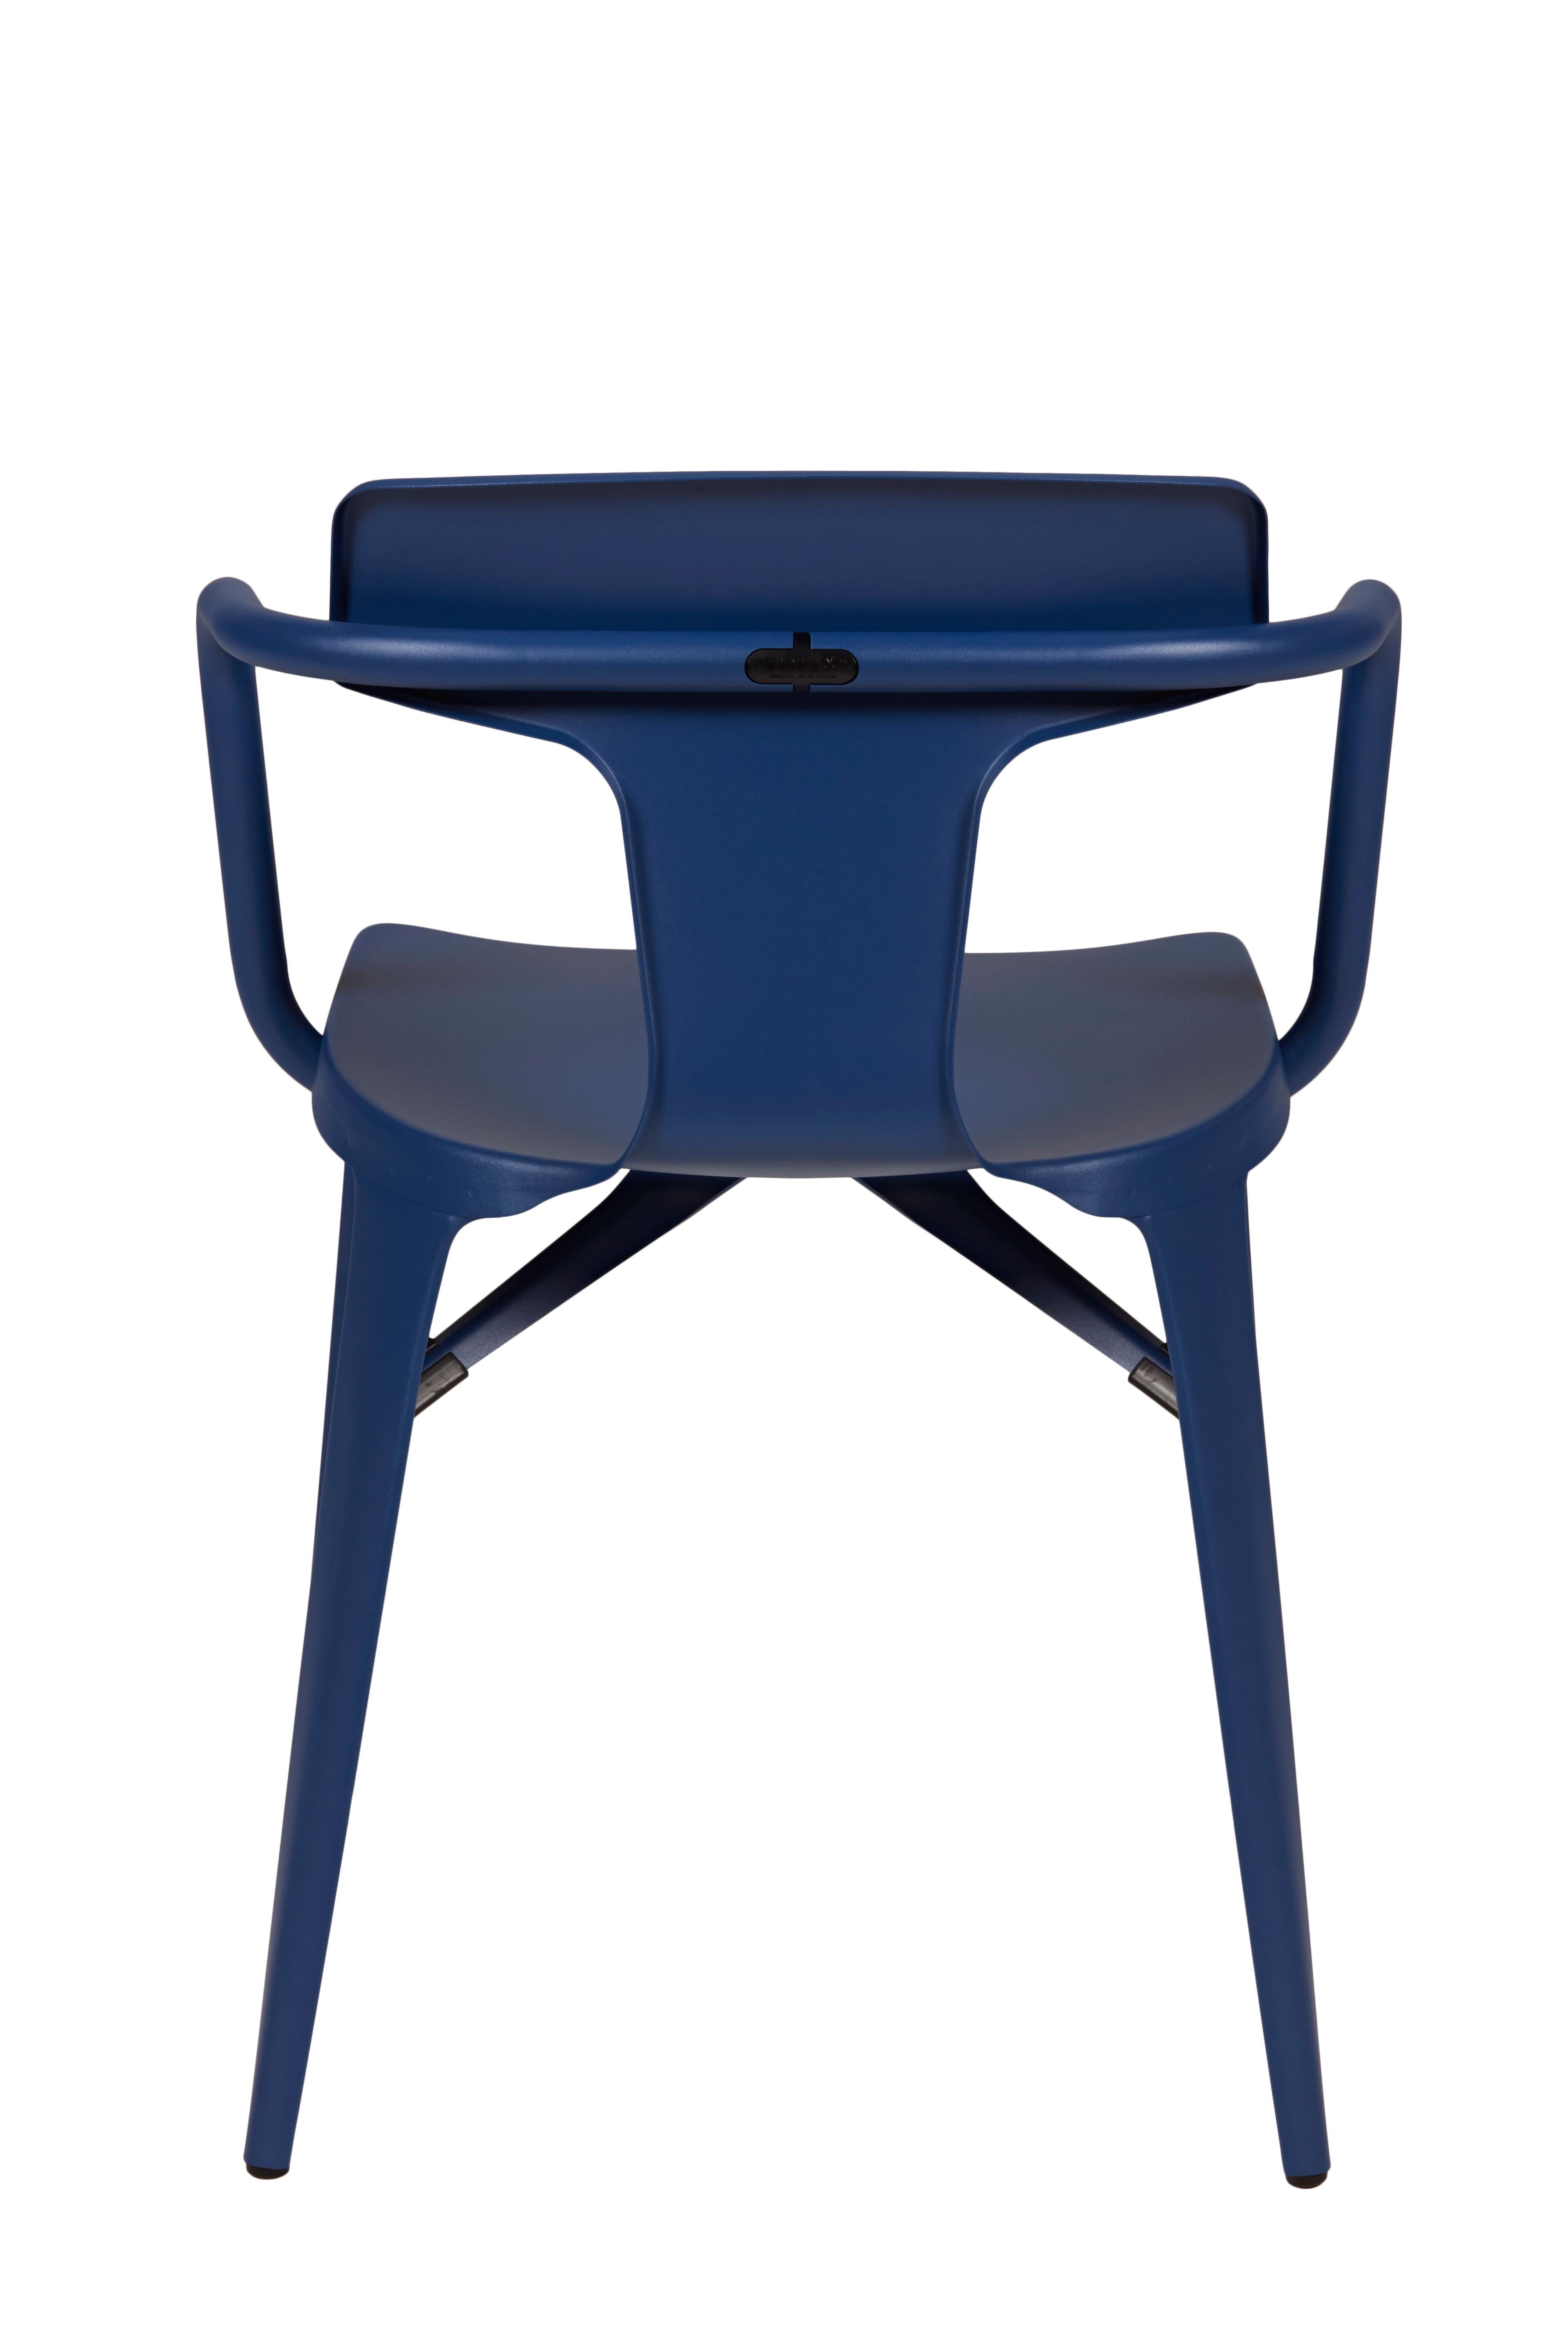 Im Angebot: T14 Chair in Pop Colors by Patrick Norguet and Tolix, Blue (Myrtille) 2